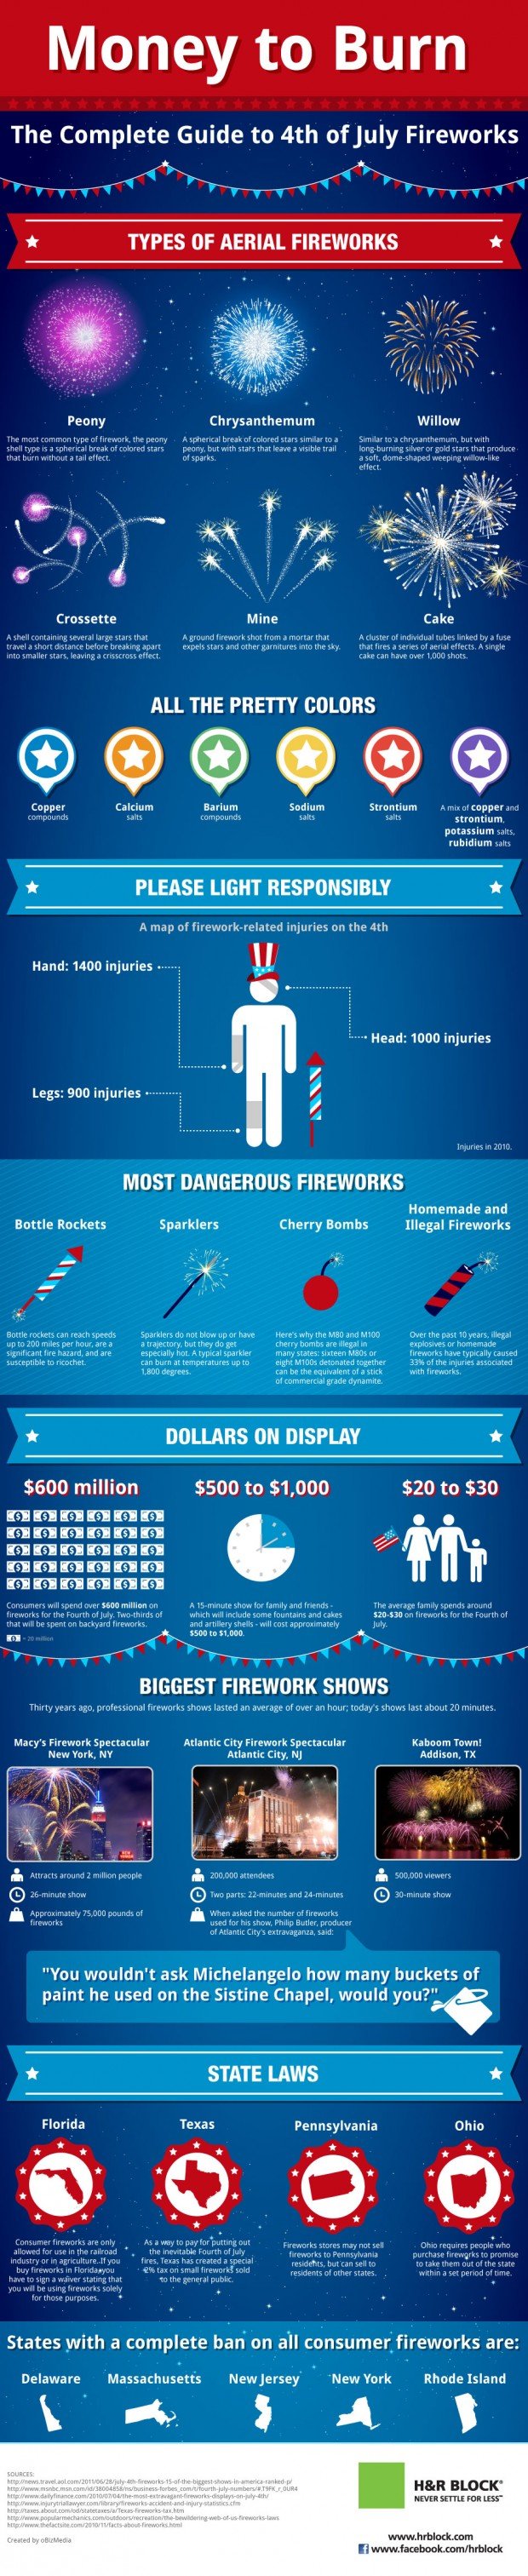 The-Complete-Guide-to-4th-of-July-Fireworks